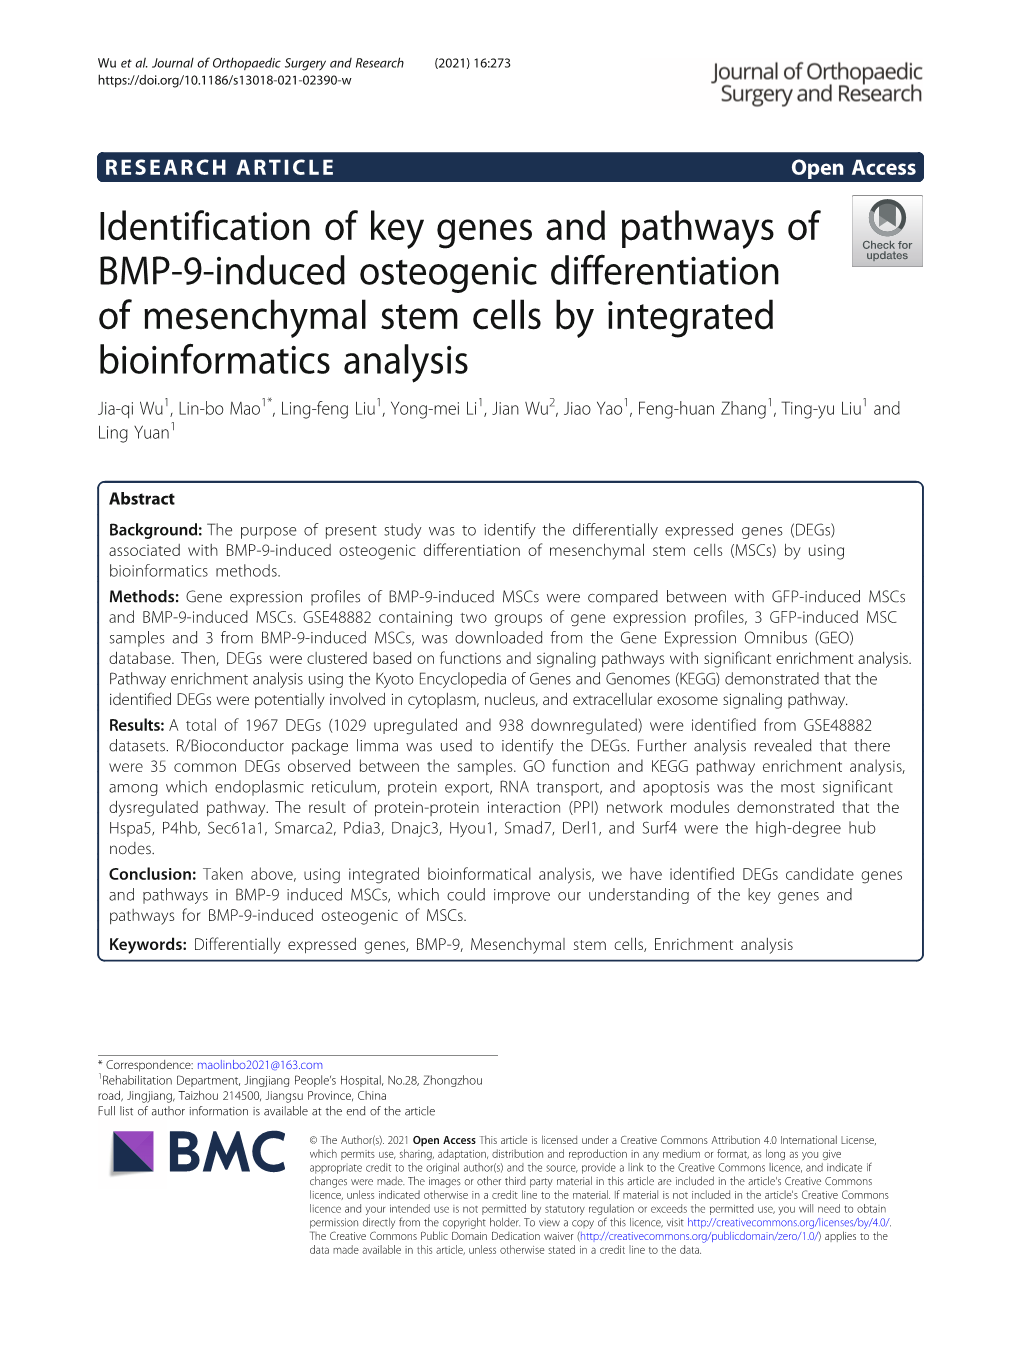 Identification of Key Genes and Pathways of BMP-9-Induced